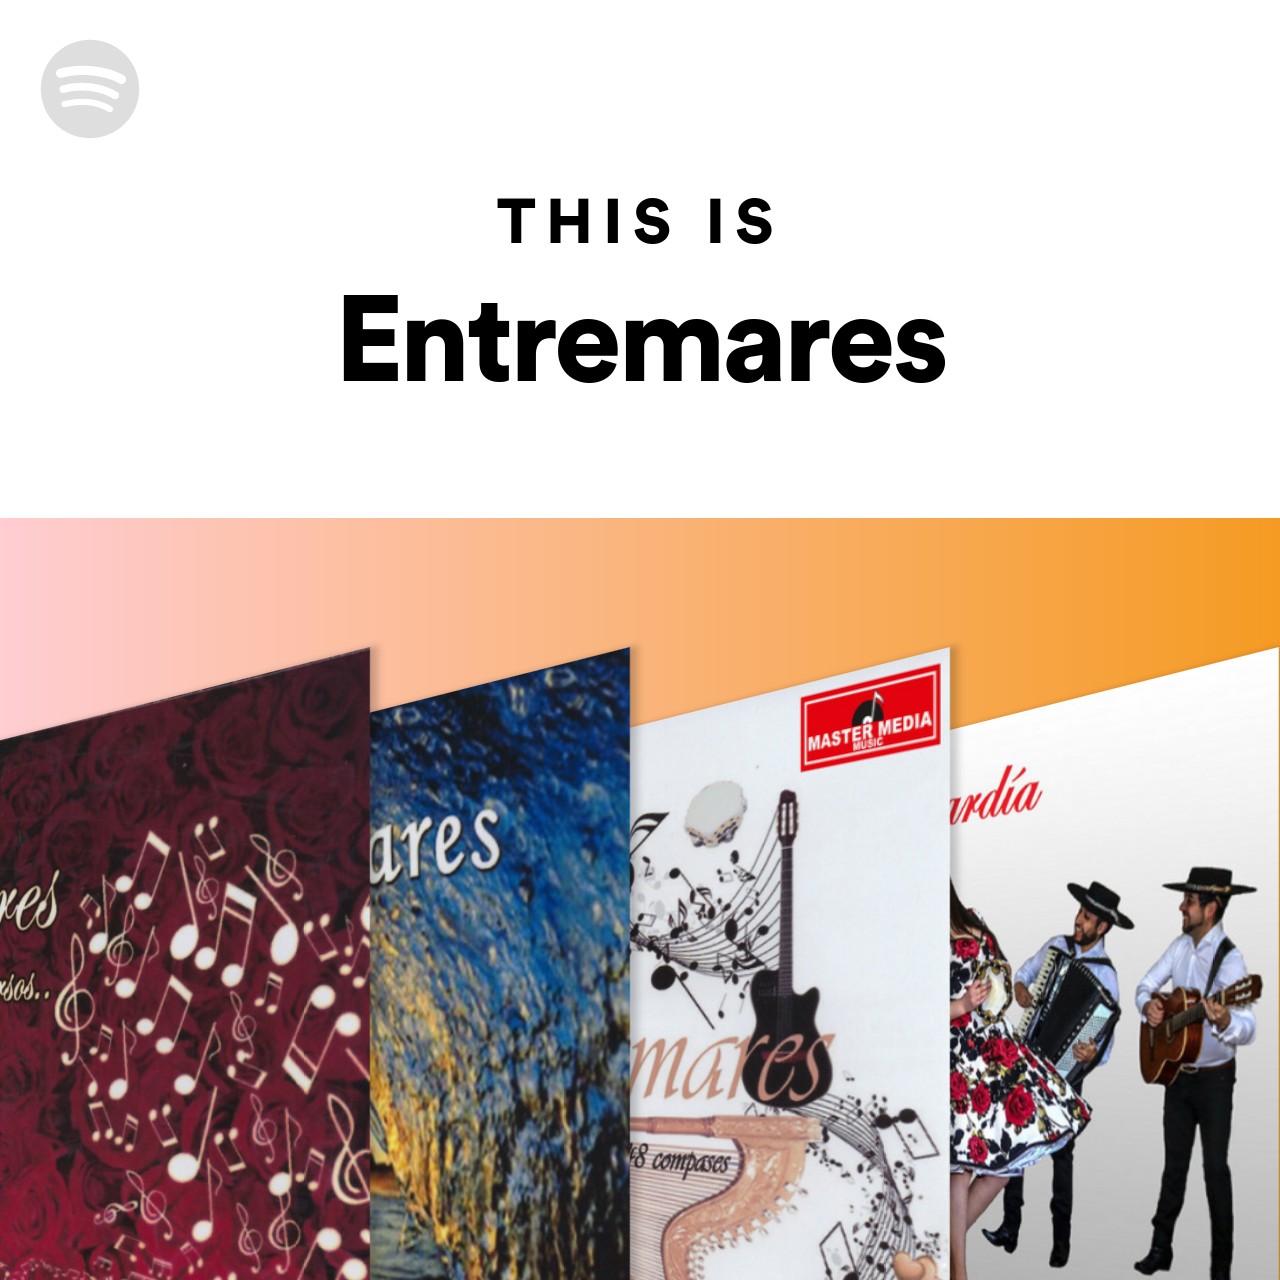 This Is Entremares